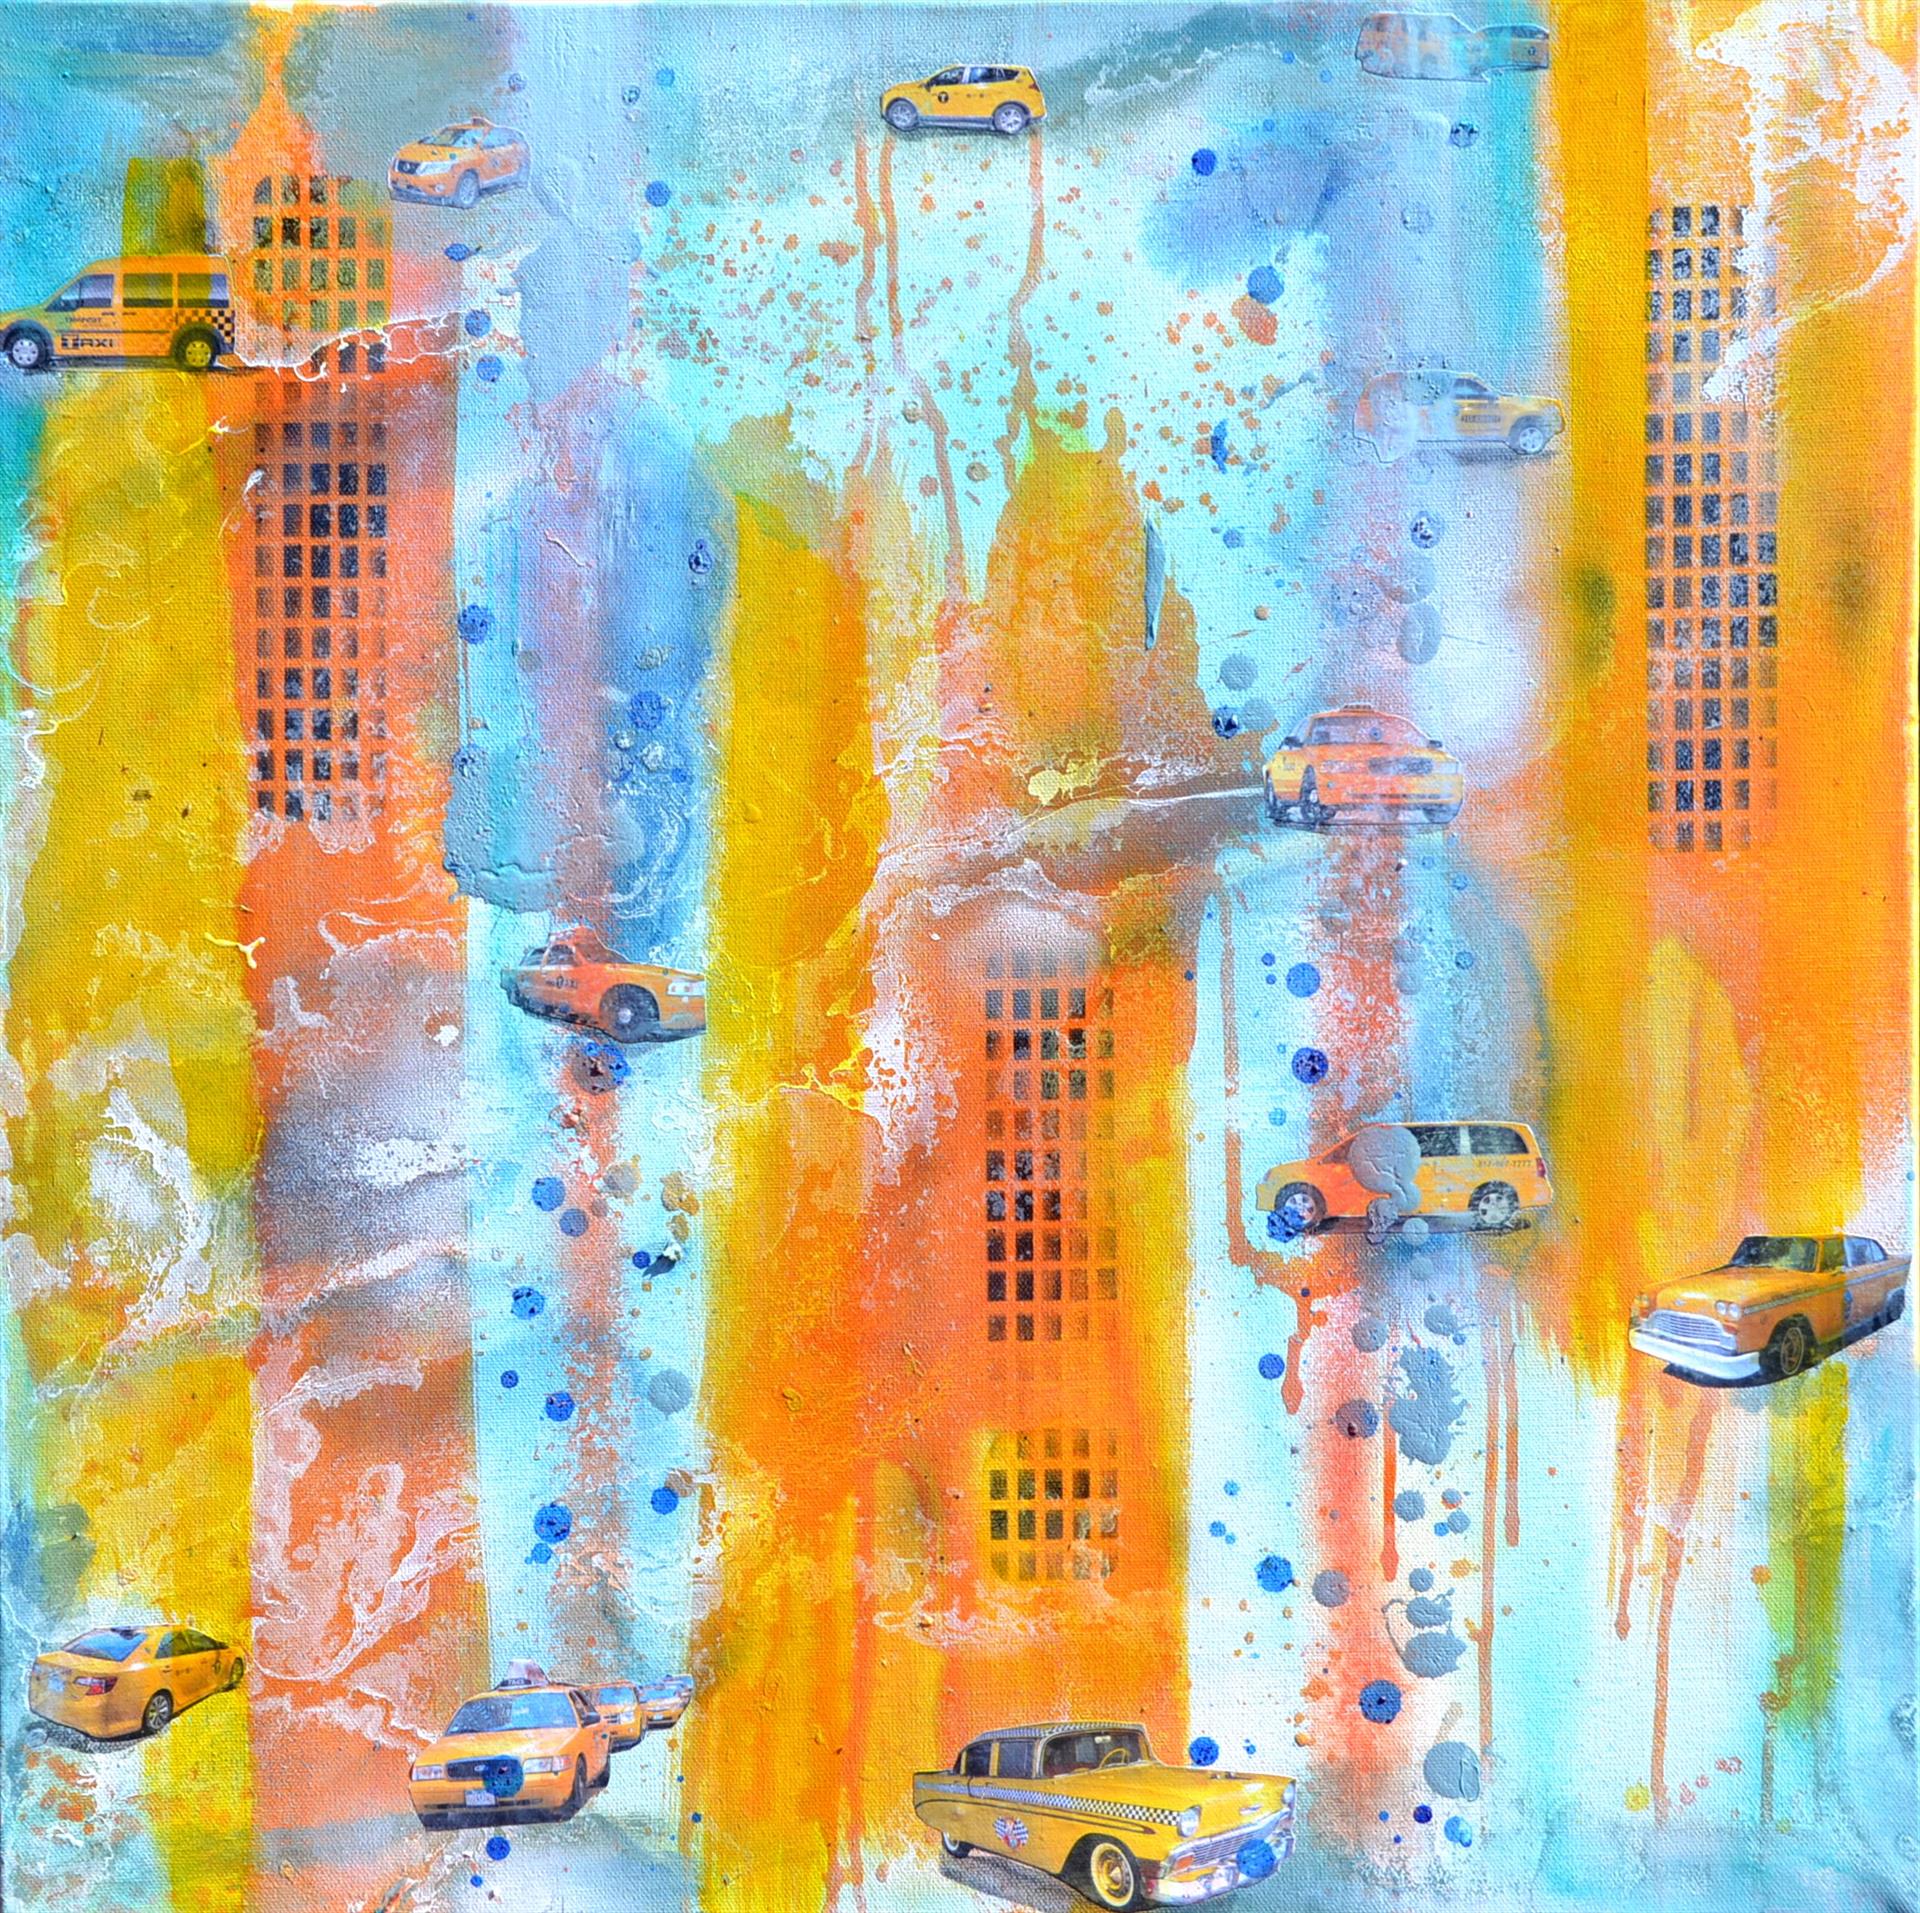 It's Raining Men, and Little, Yellow Taxis 24X24